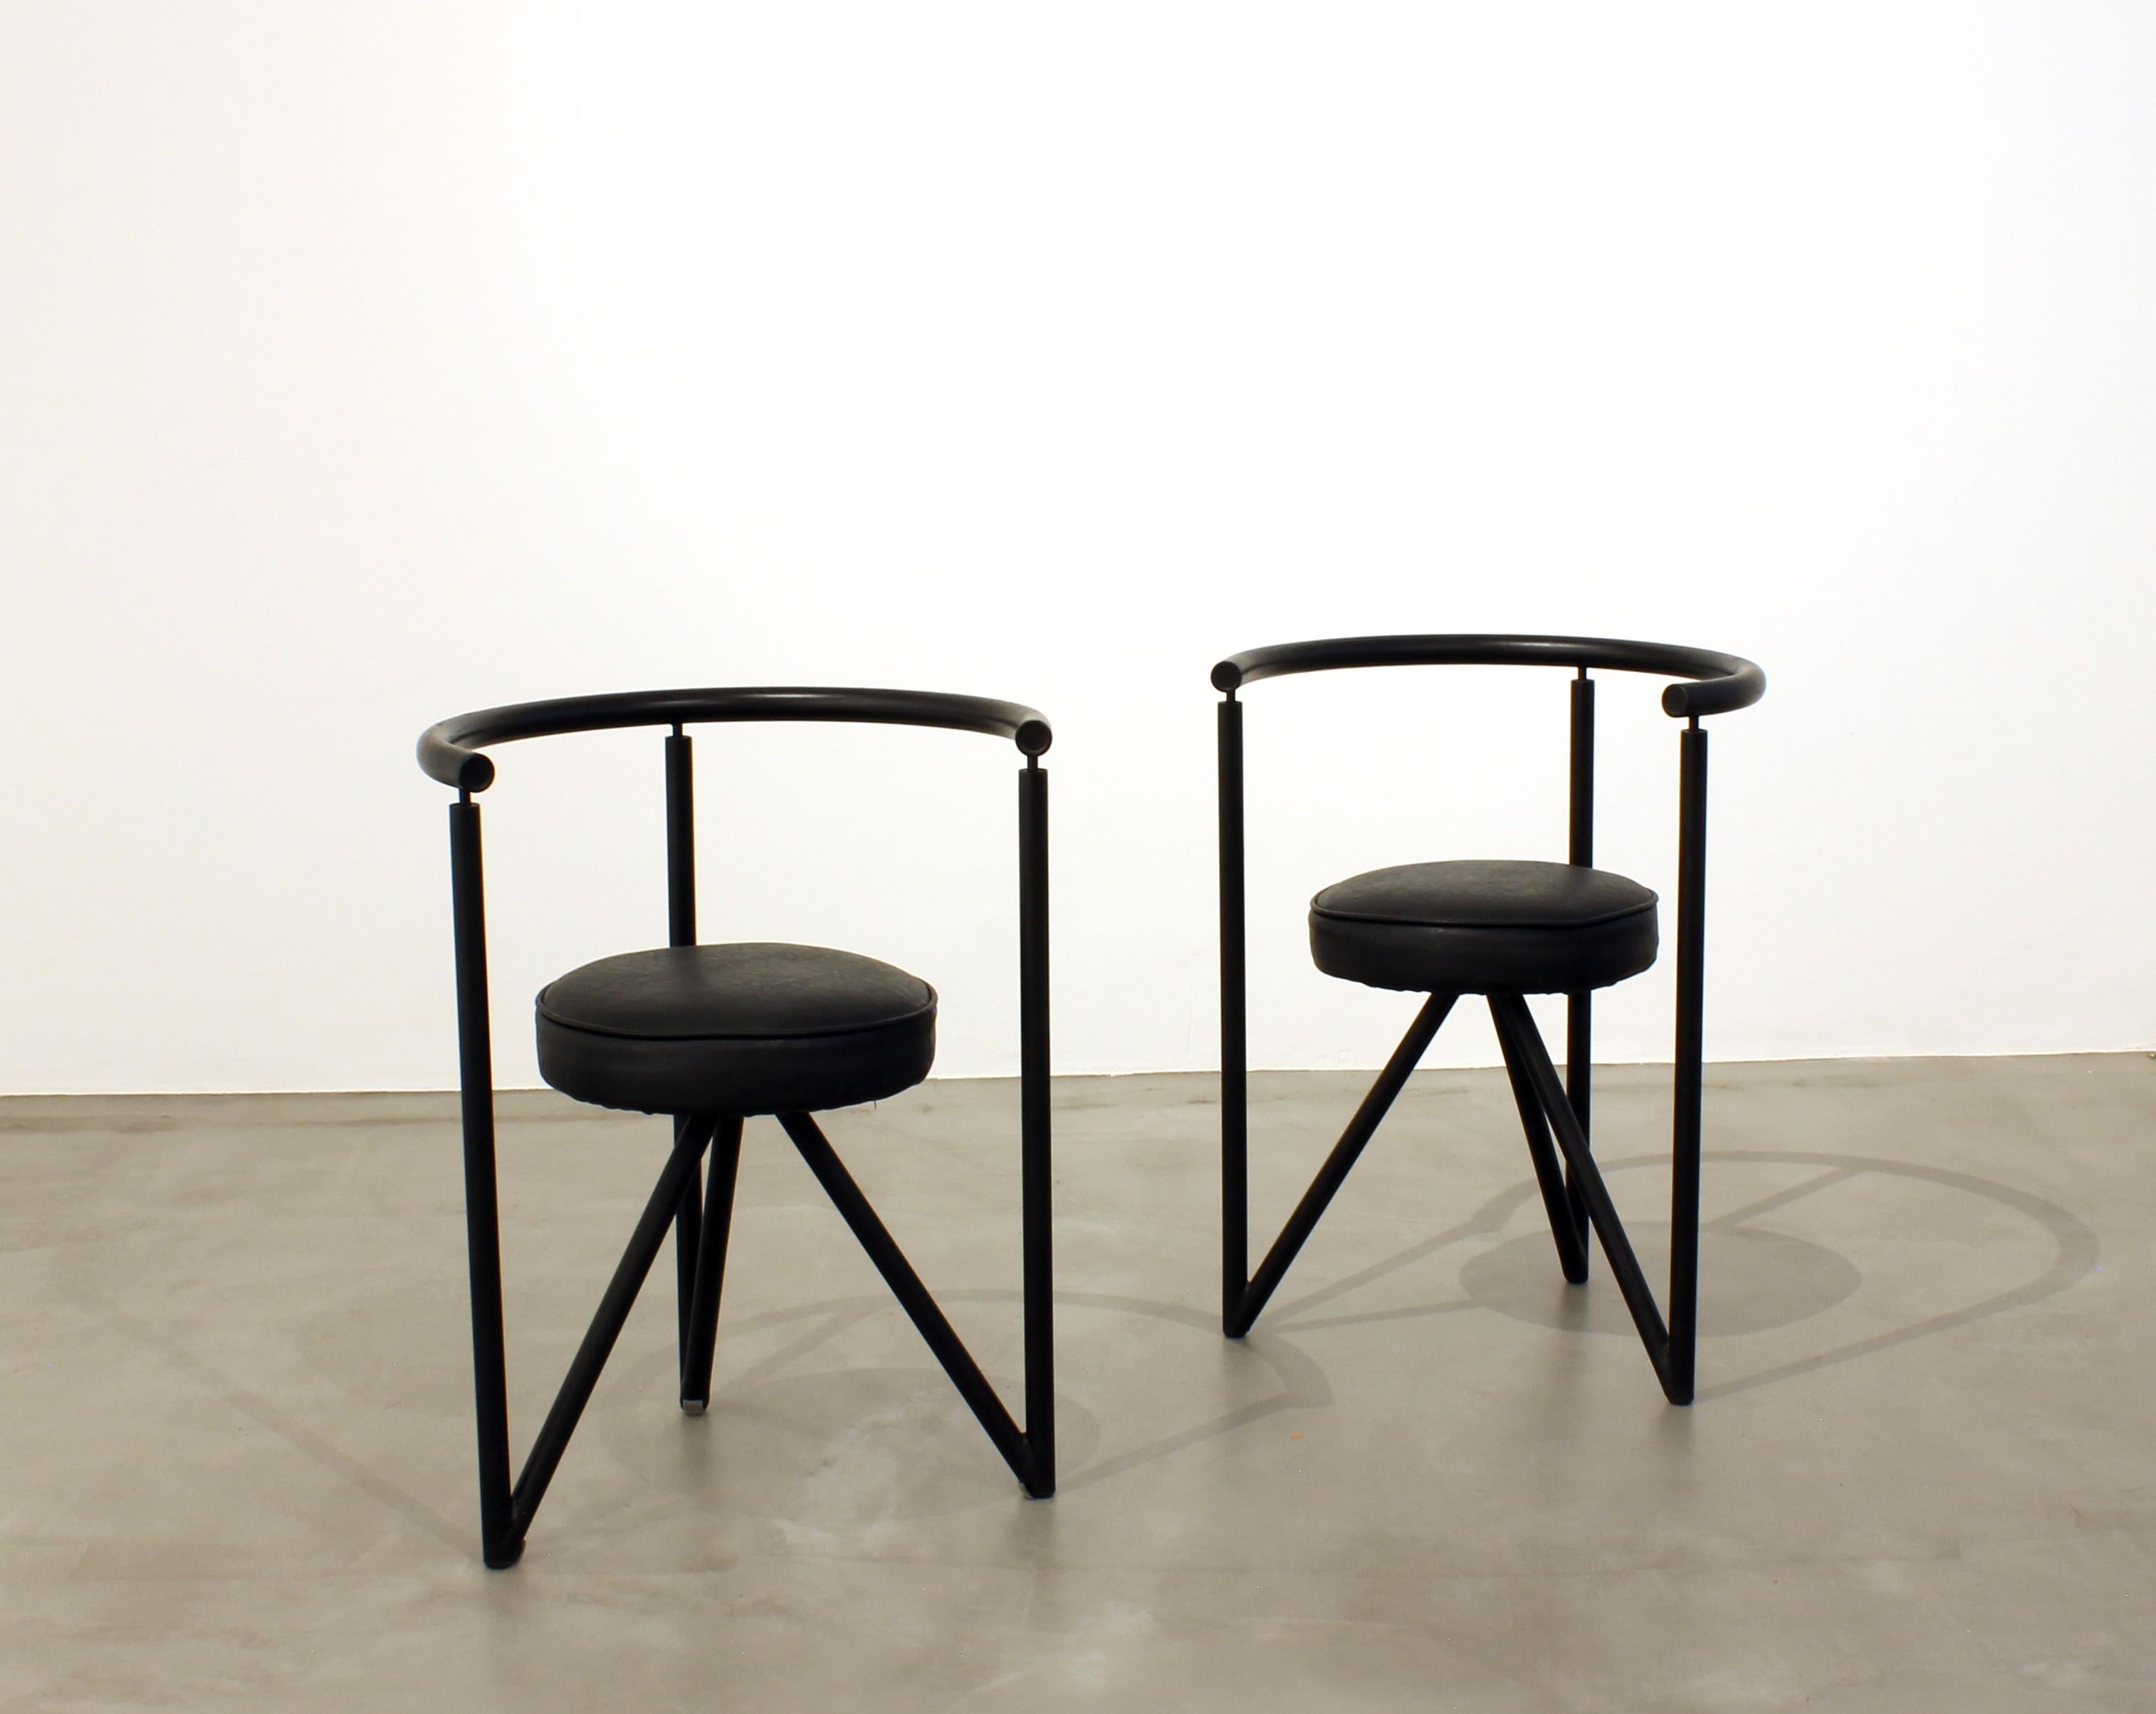 Pair of Miss Dorn chairs by Philippe Starck for Disform 1982. Black metal frame and round cushioned seating.